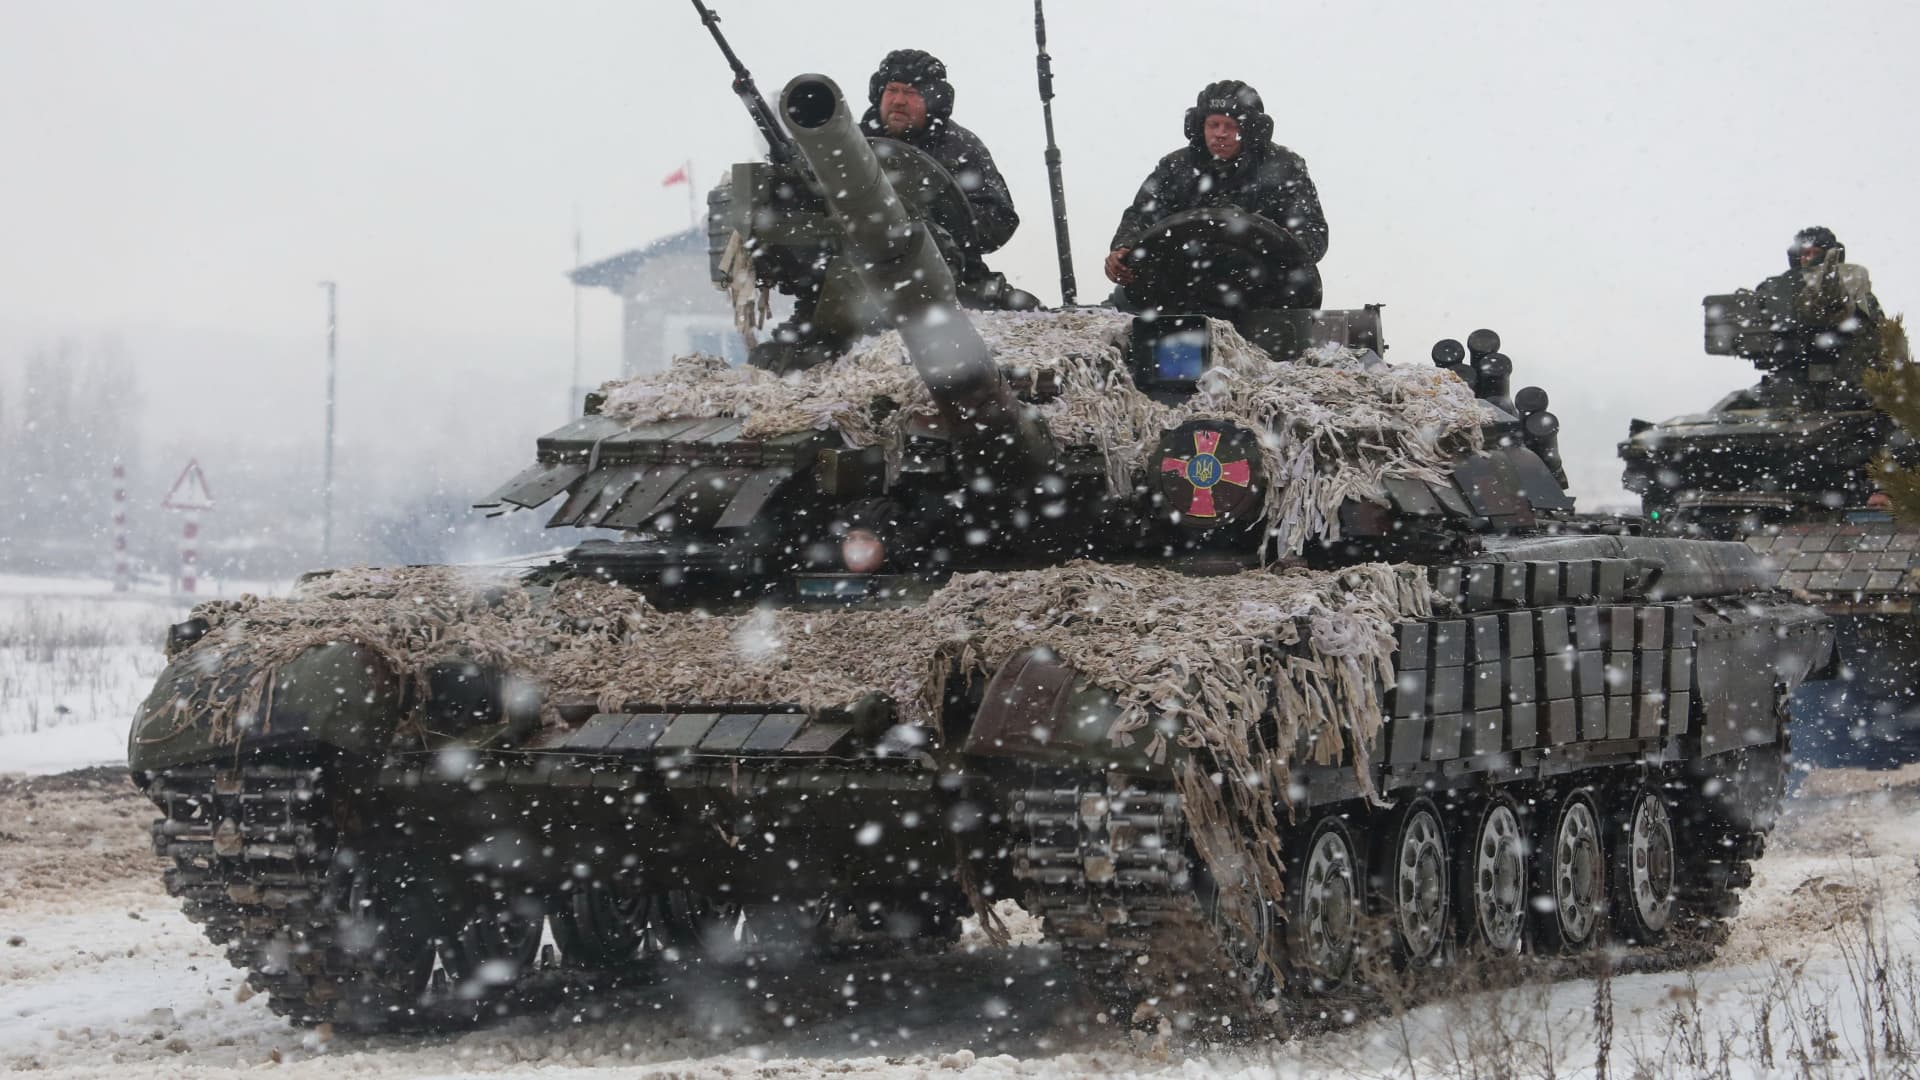 Service members of the Ukrainian Armed Forces drive a tank during military exercises in Kharkiv region, Ukraine February 10, 2022.